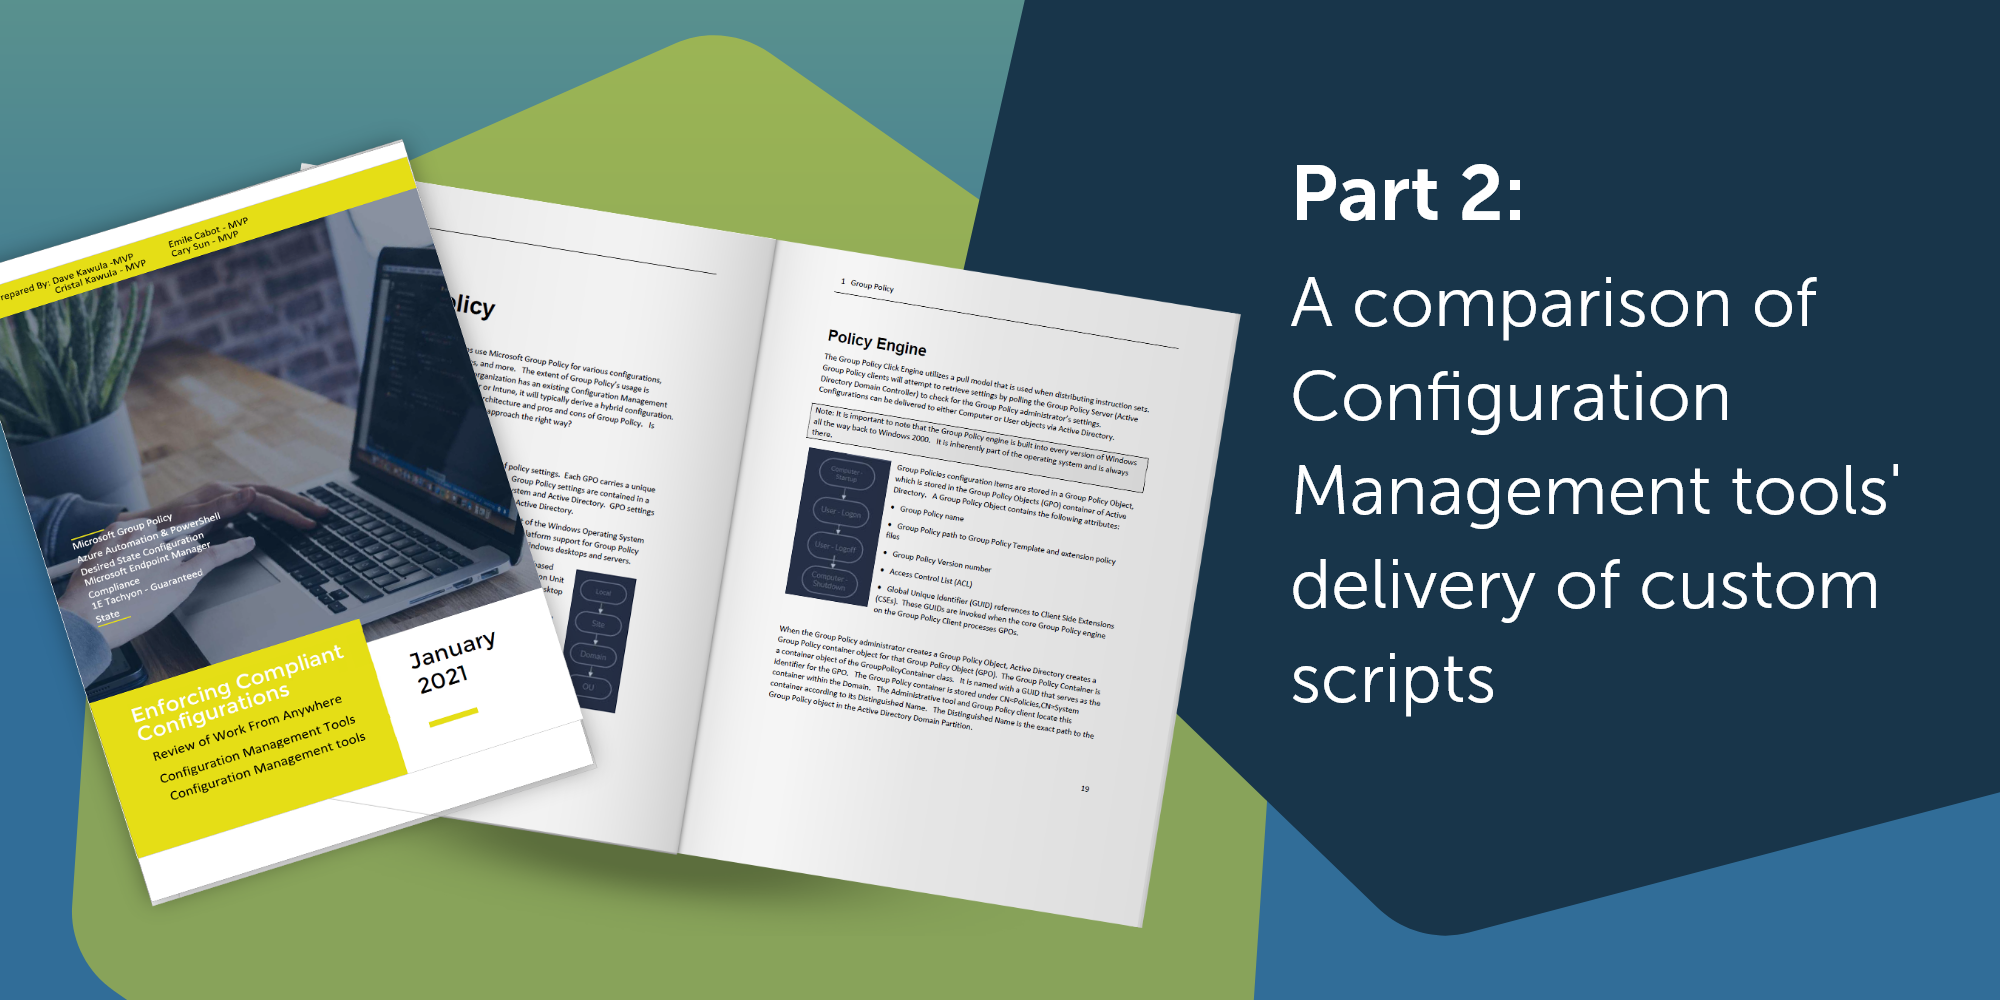 Part-2-A-comparison-of-Configuration-Management-tools-delivery-of-custom-scripts 2x